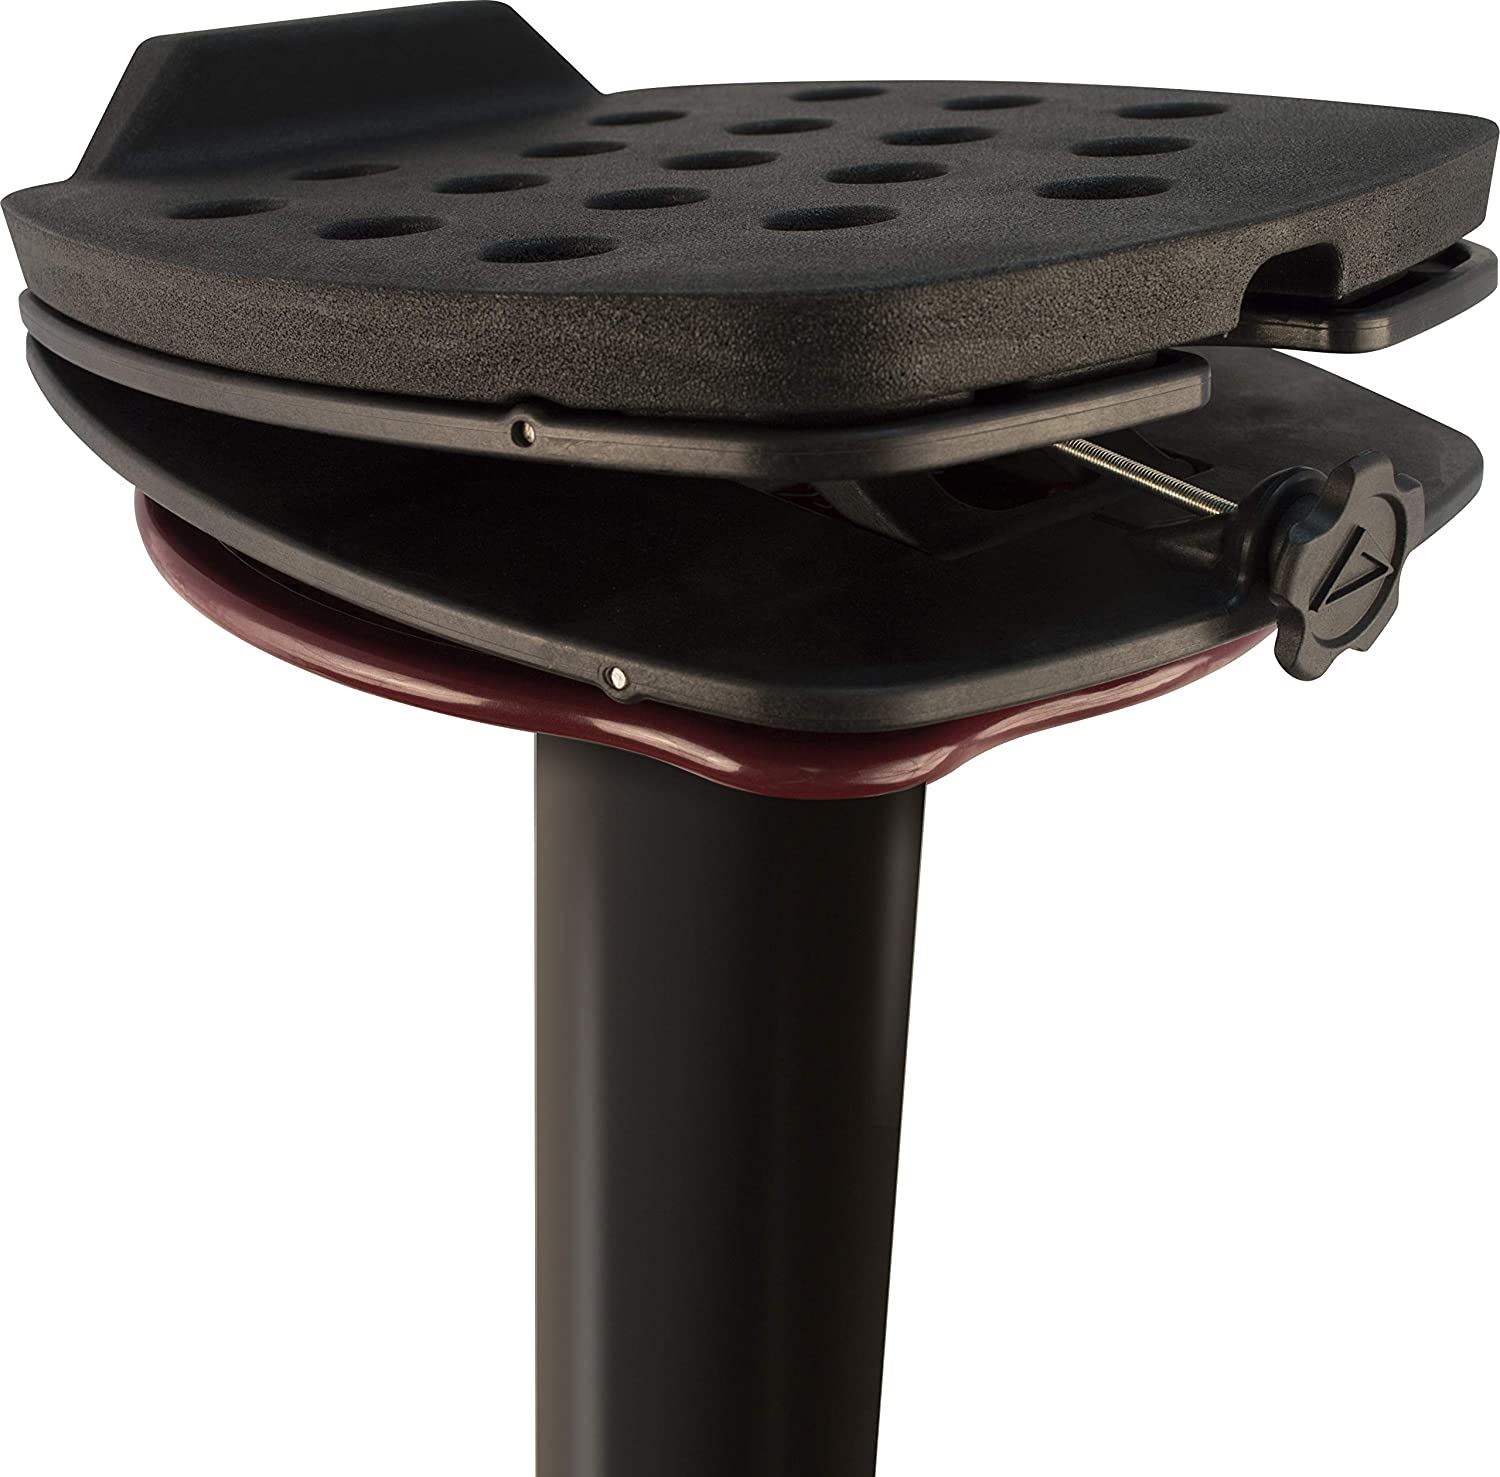 Ultimate Support MS-100R - Studio Monitor Stand, PAIR, Red [Special Order]